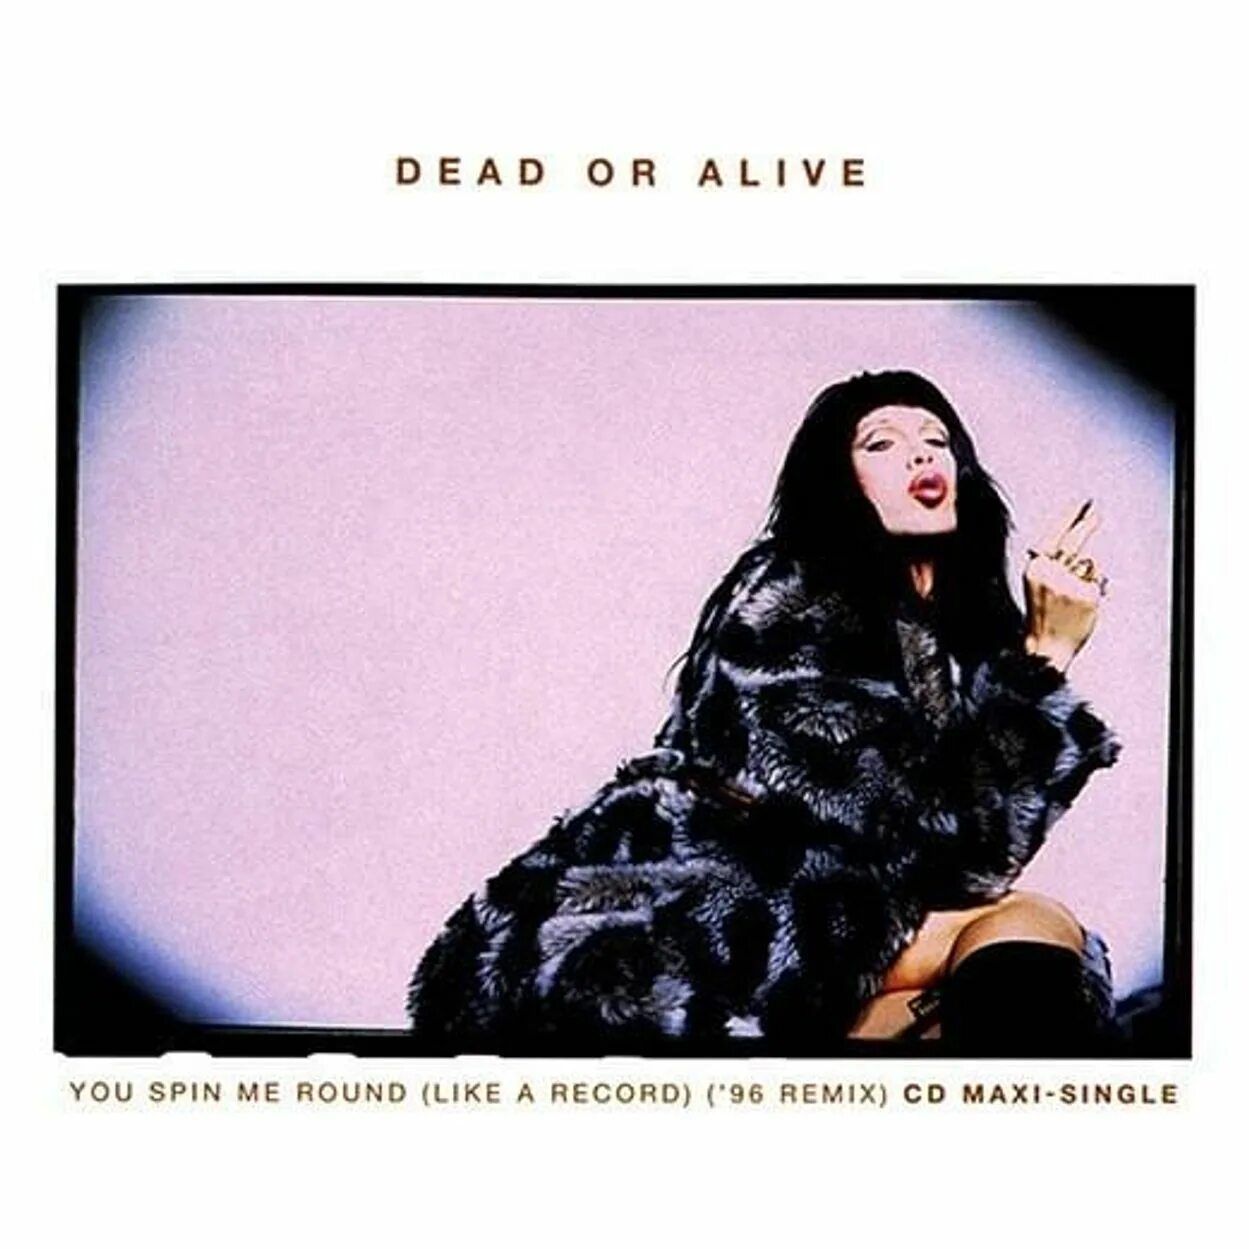 Dead or Alive - you Spin me Round (like a record) обложка альбома. You Spin me Round Dead or Alive обложка. You Spin me Round Dead or Alive солист. Spin me Round.